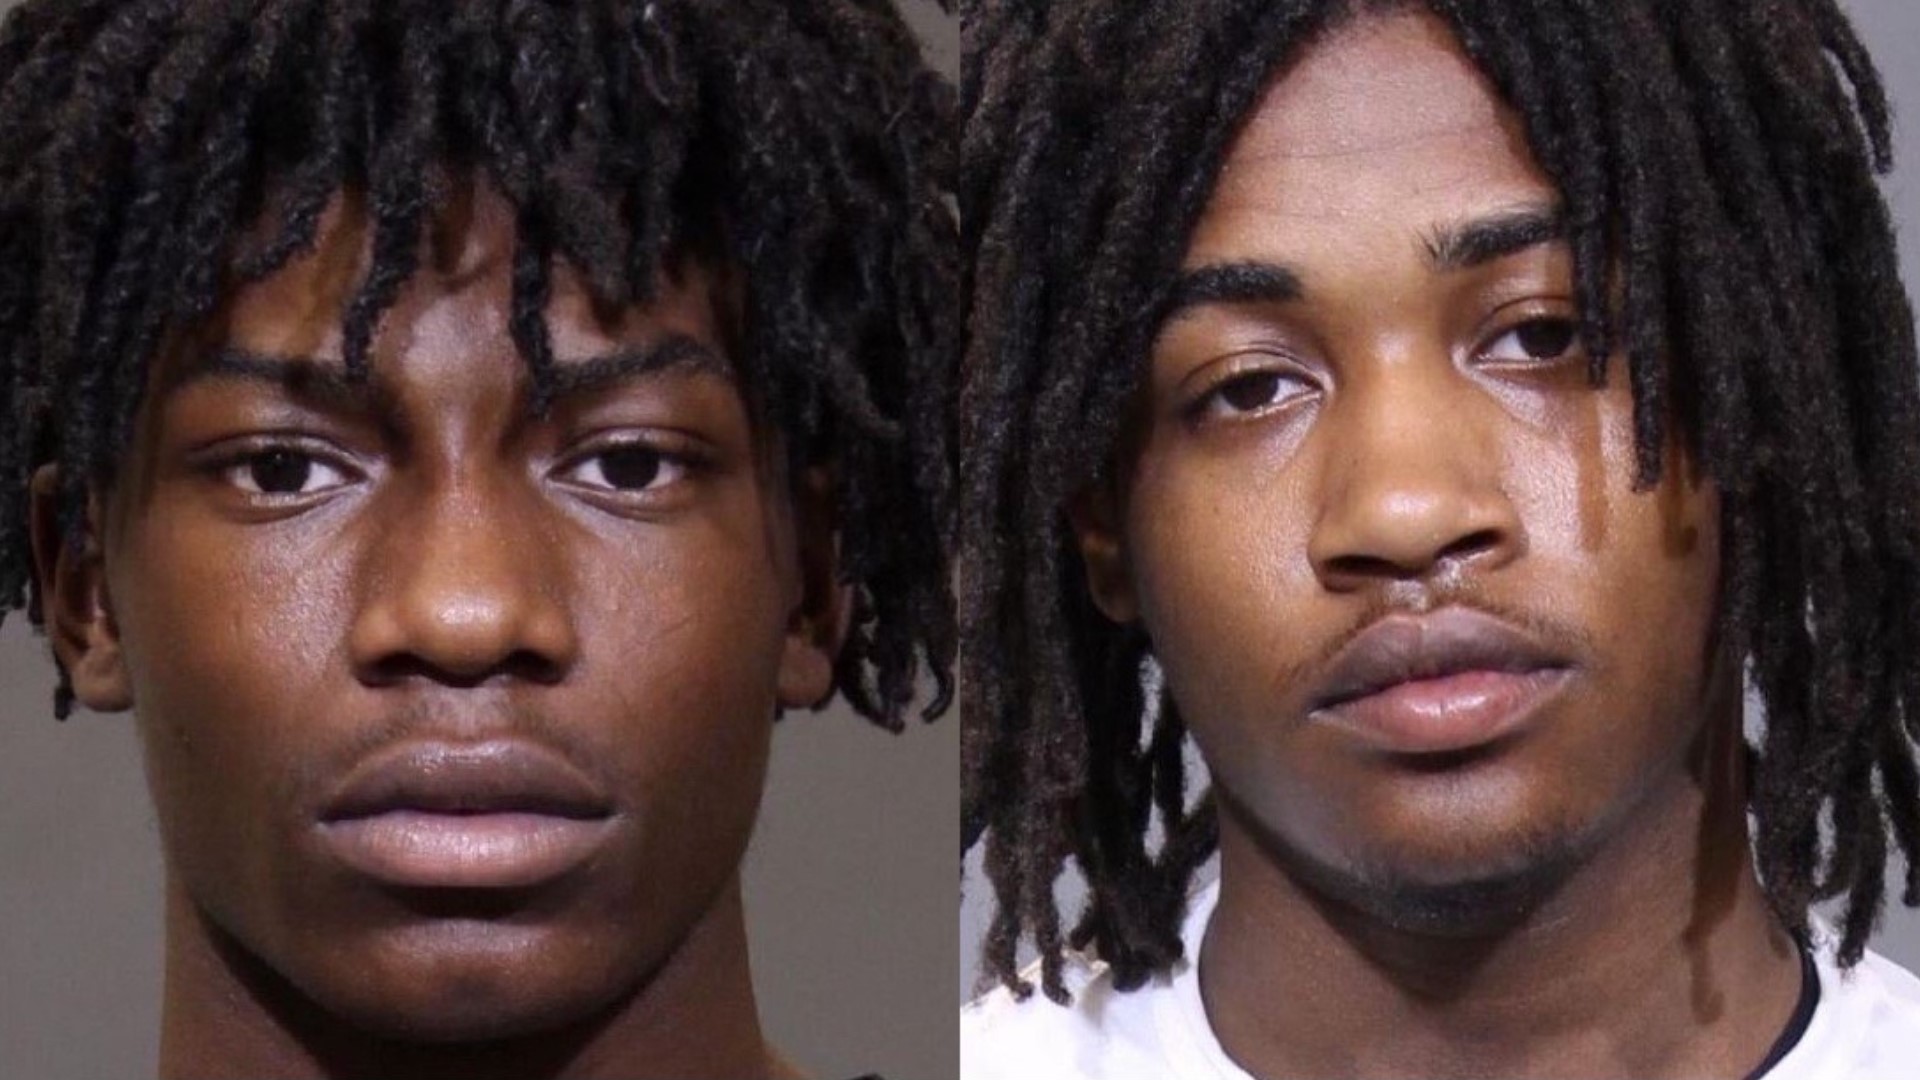 Police said 16-year-old Taywaun Gavin and 17-year-old Jebrelle McClendon are suspects in the June 25 shooting death of Neal Smith.